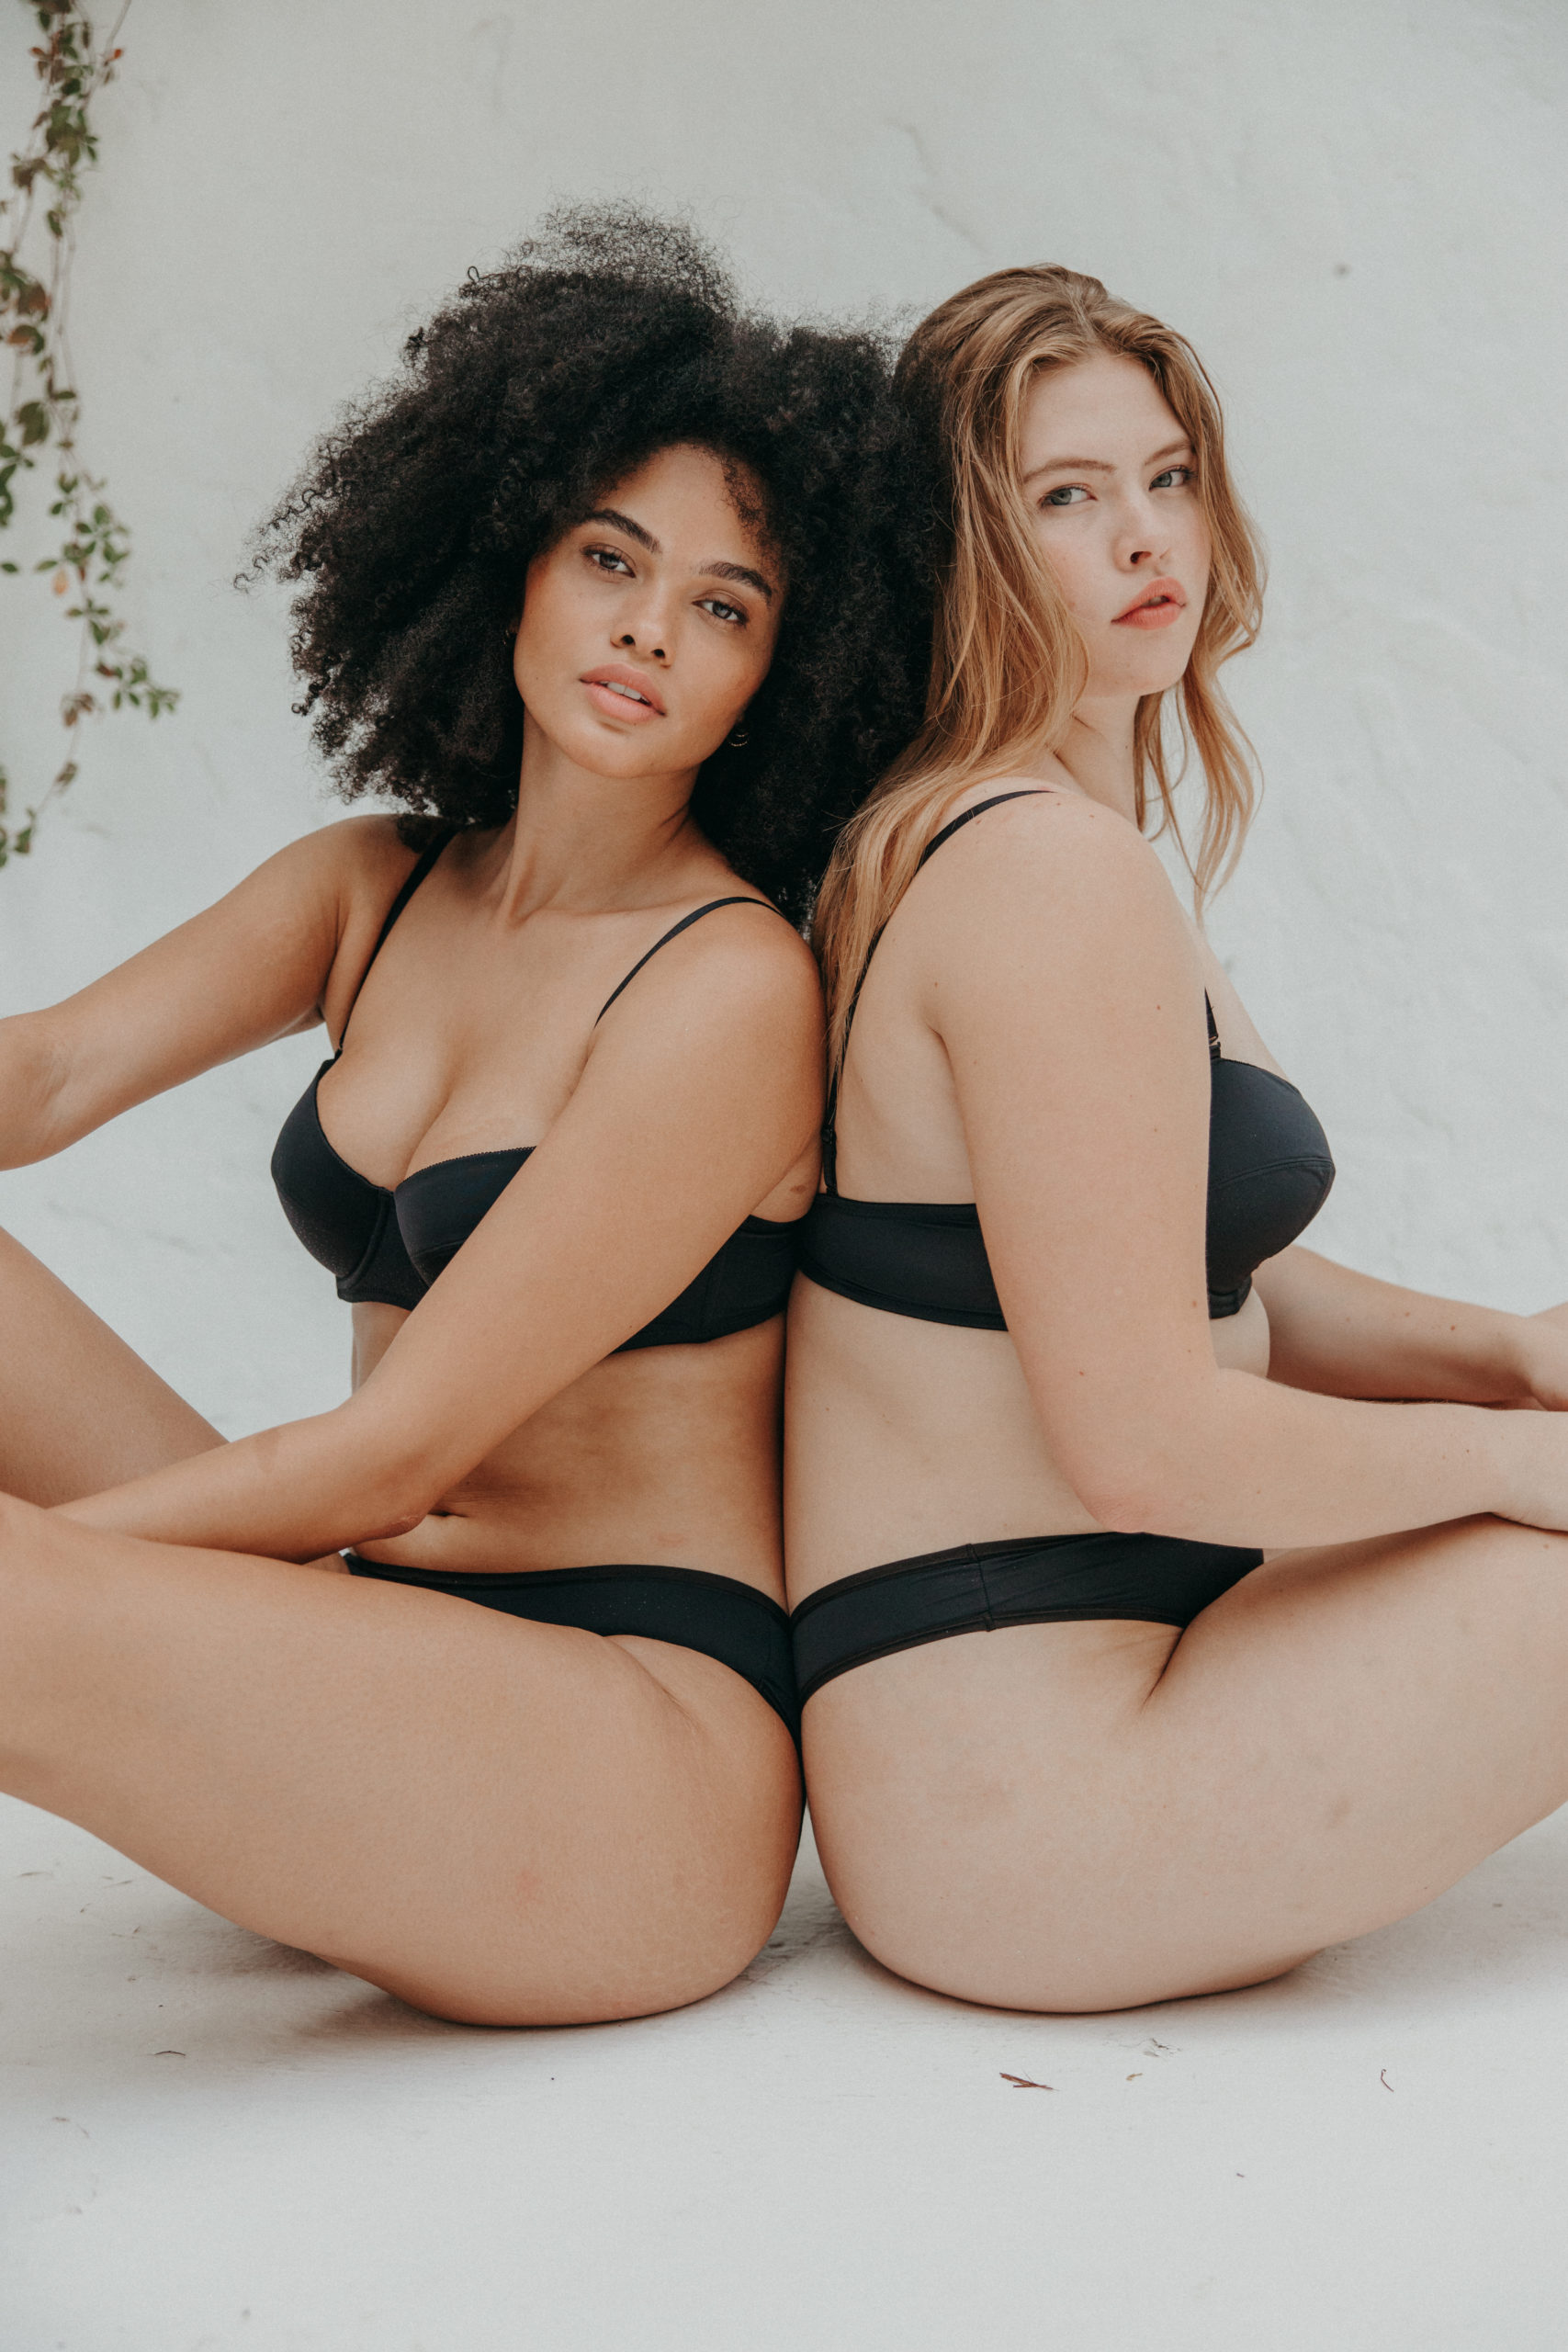 New Undergarment Launches For Adults, Tweens & Teens (Win!) - VITA Daily